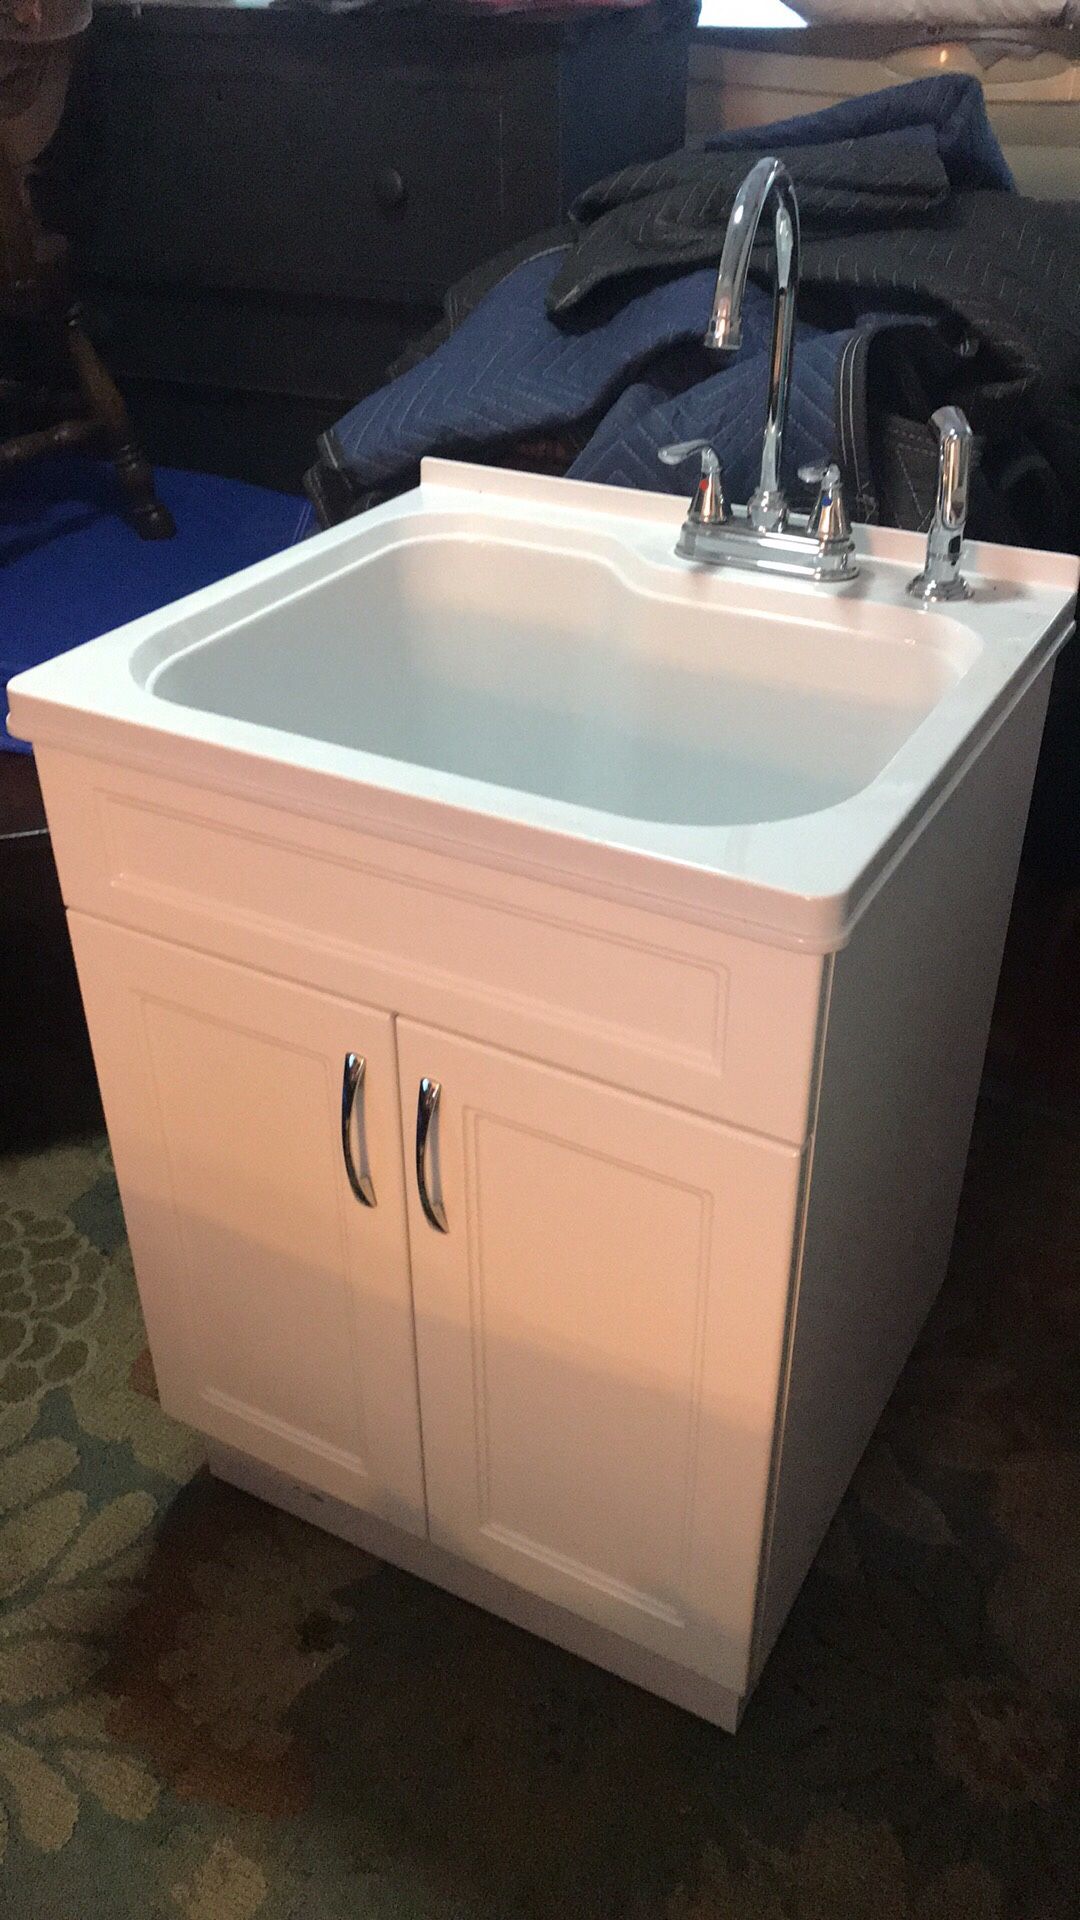 Laundry sink cabinet